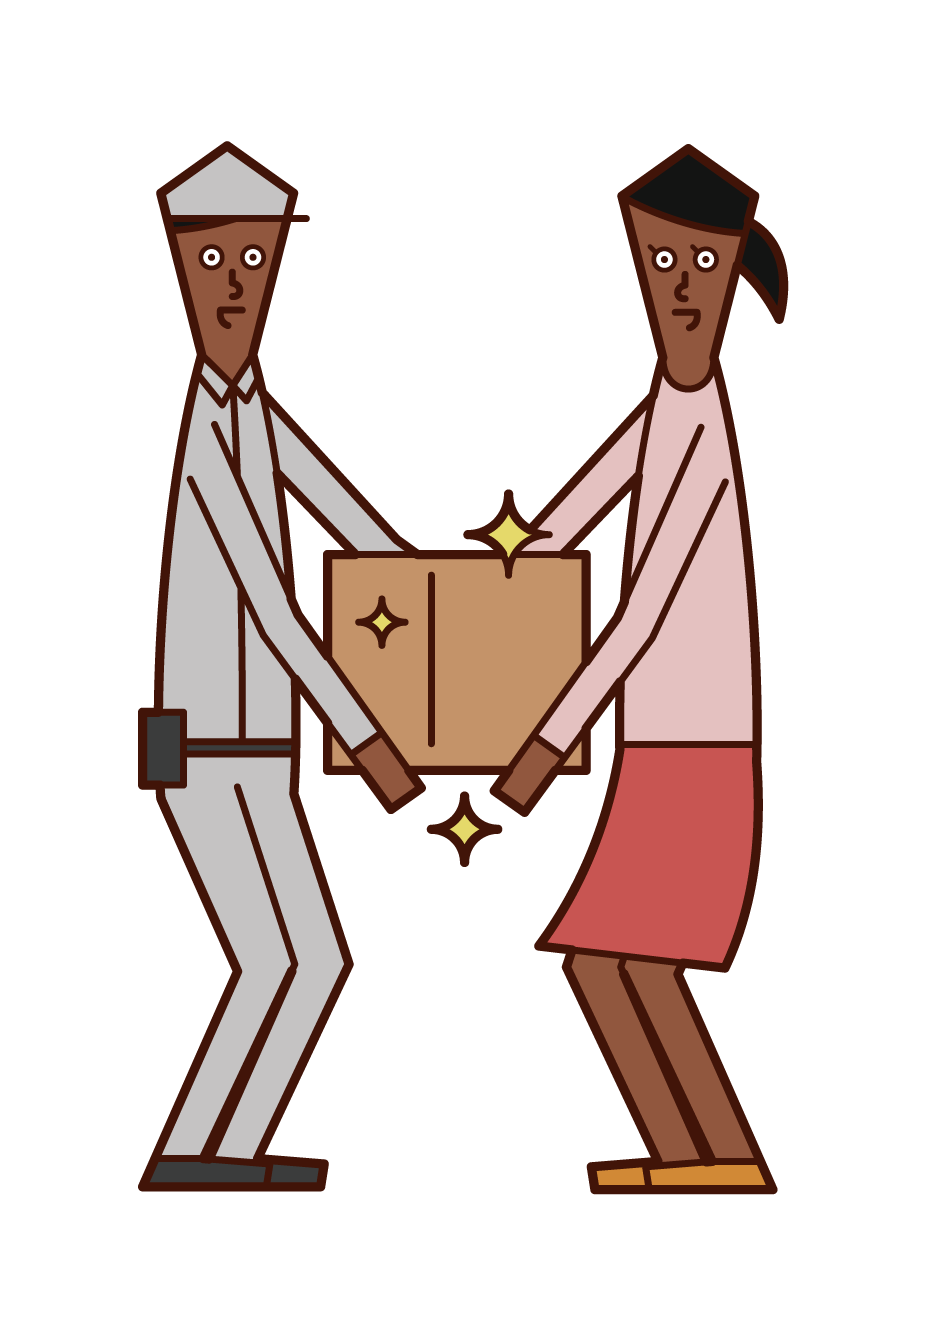 Illustration of a delivery driver (man) handing over a package